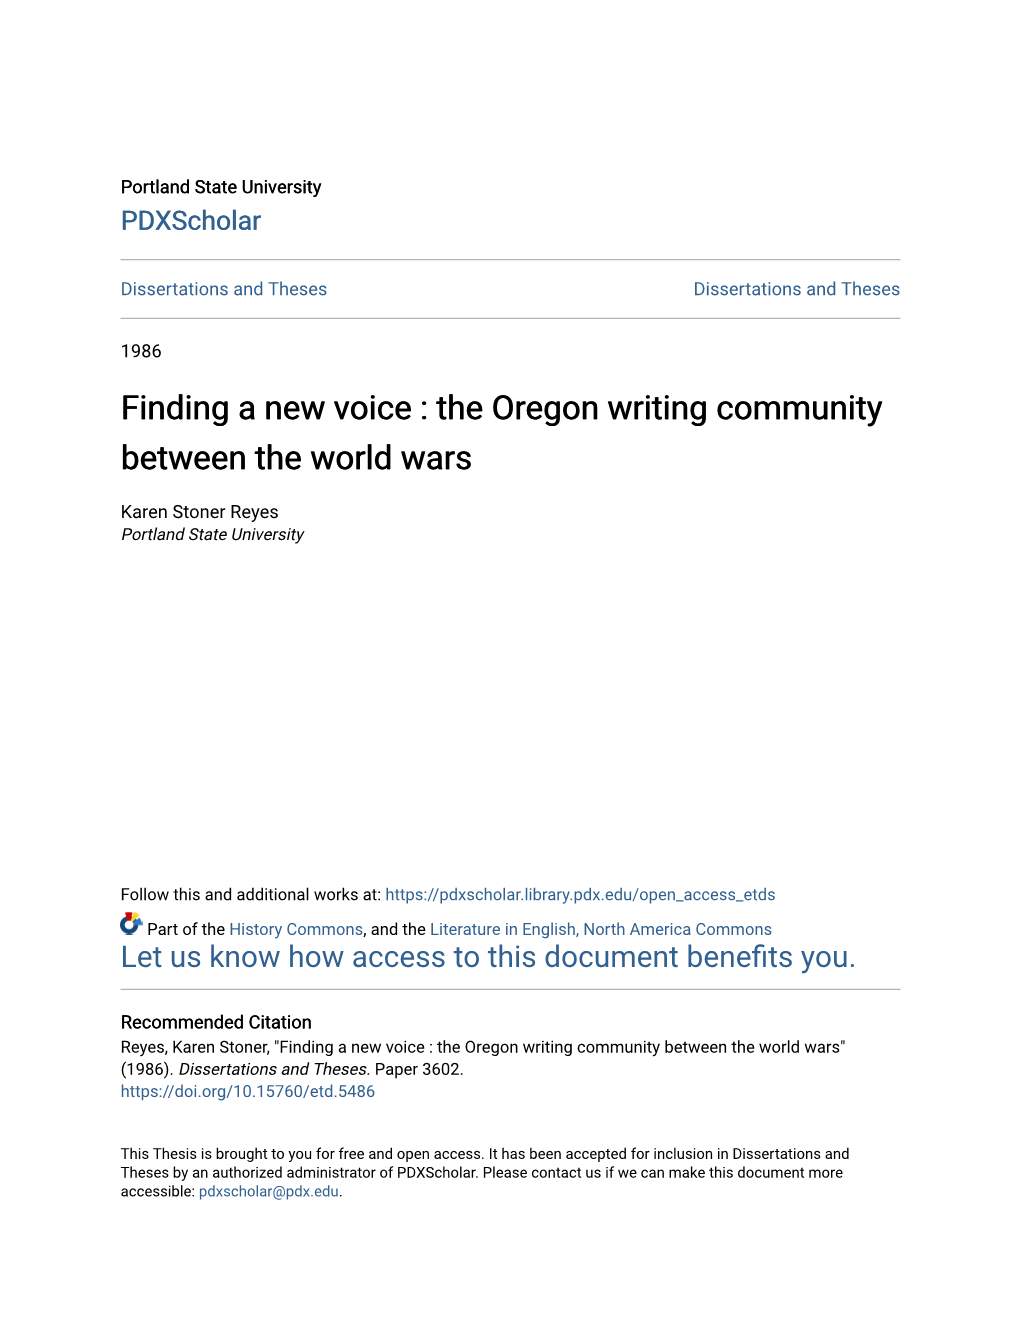 The Oregon Writing Community Between the World Wars